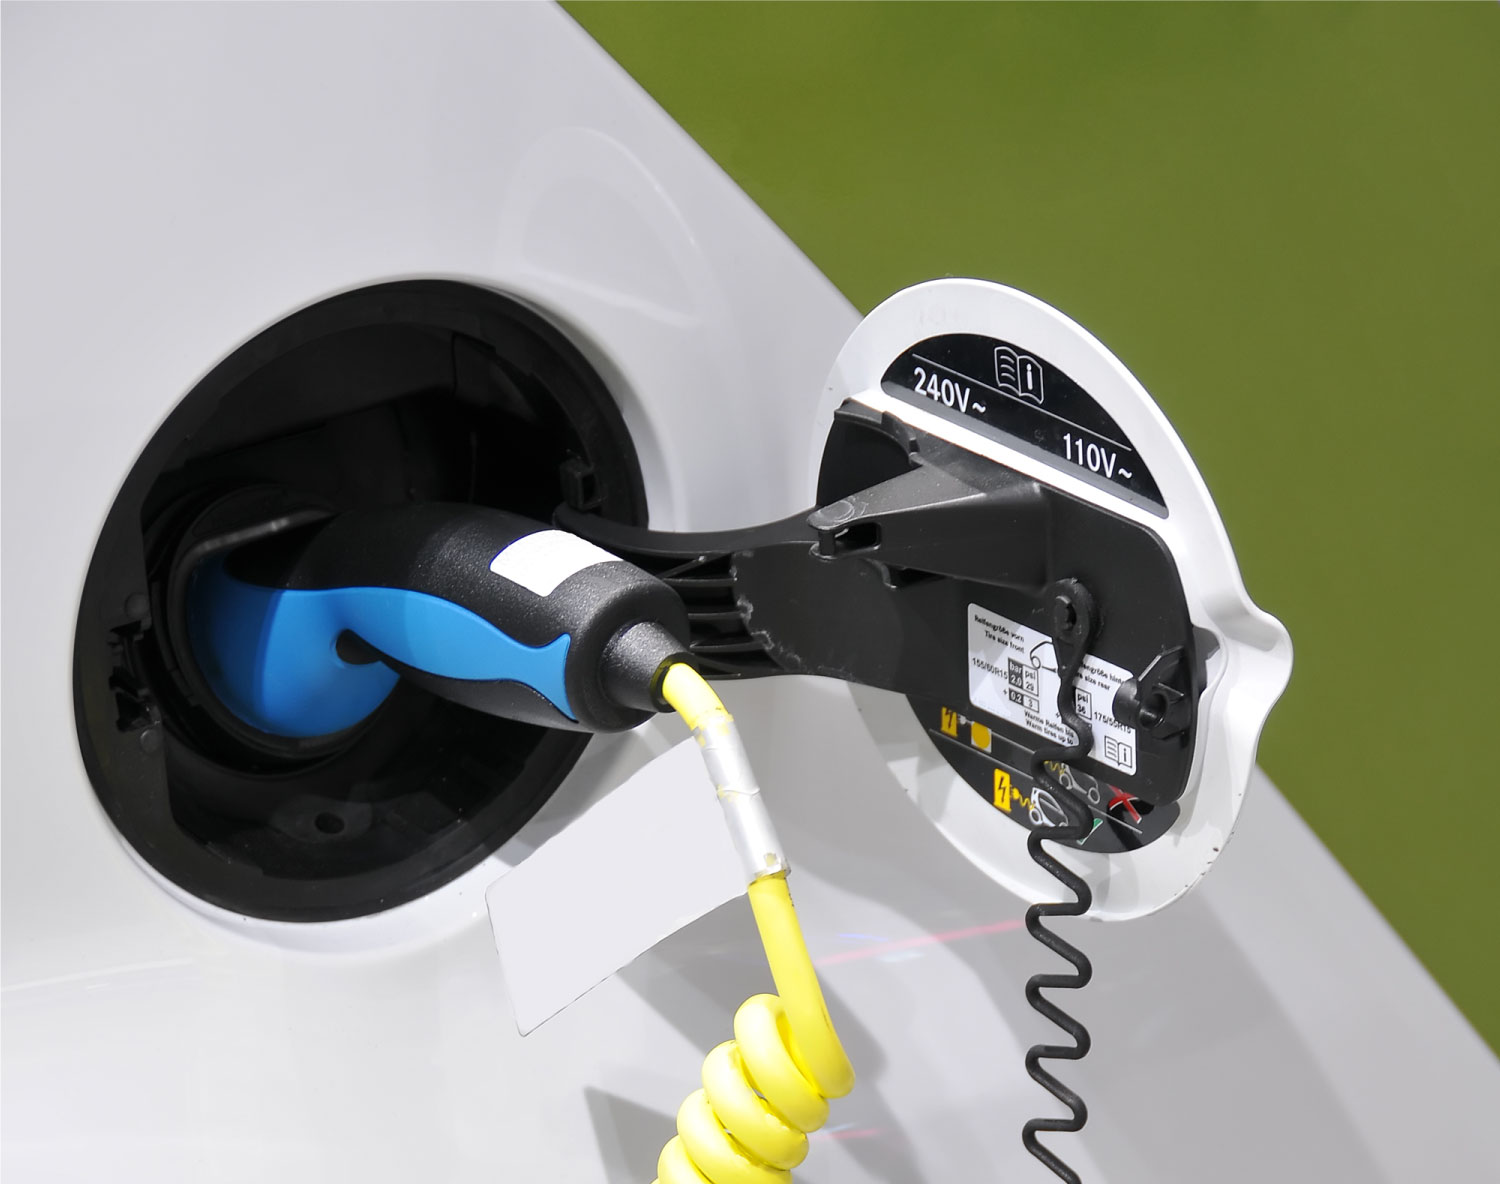 a close up of the charging point of an electric vehicle plugged in for charging